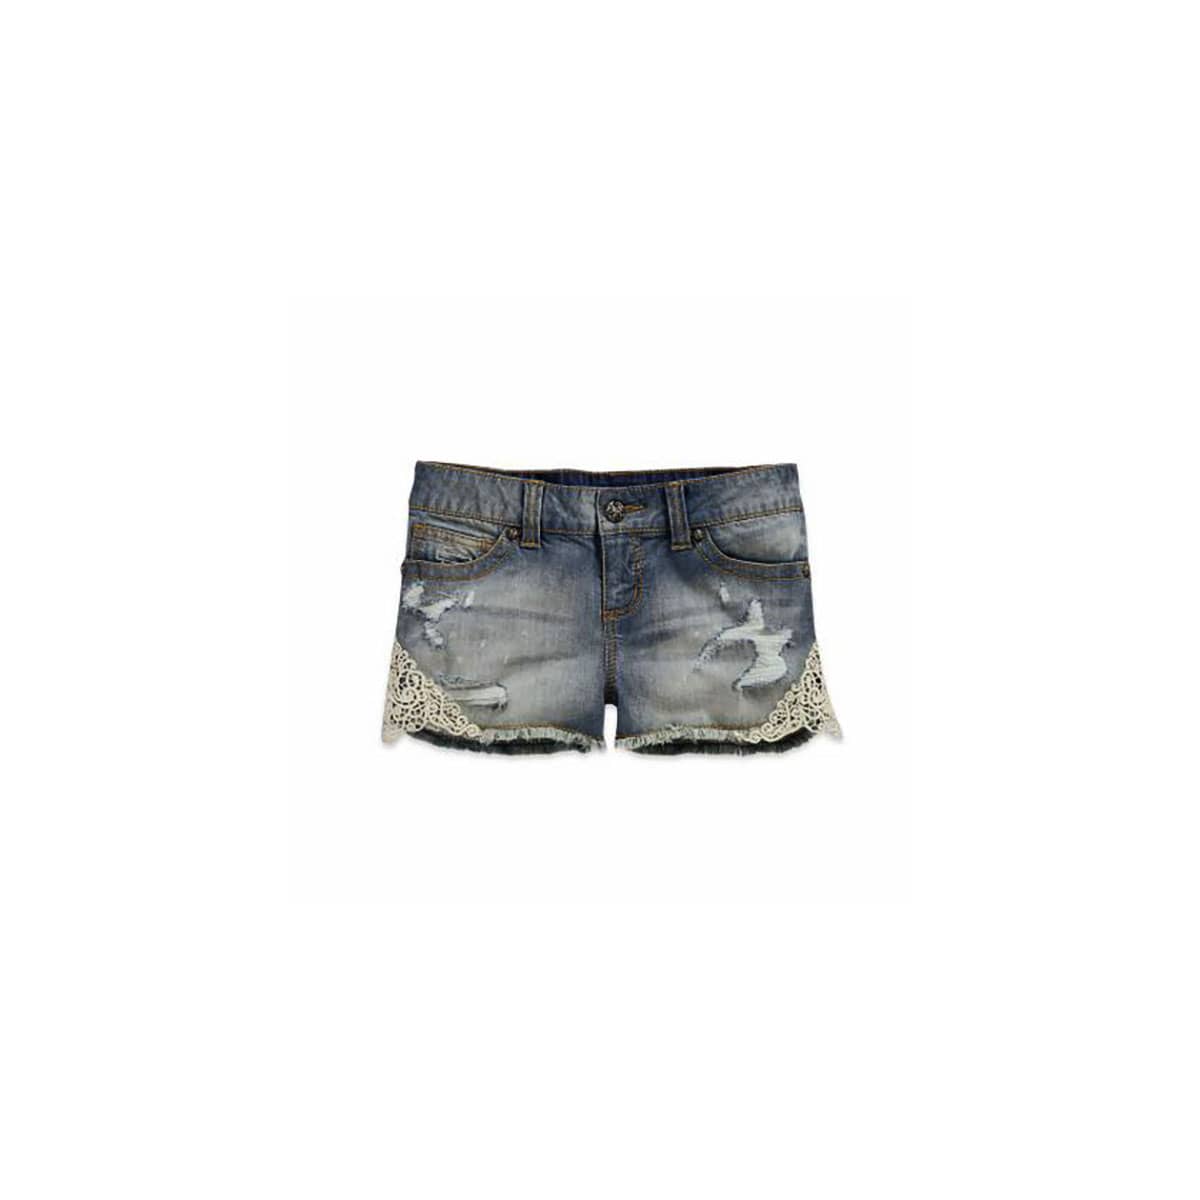 Crocheted Accented Denim Shorts